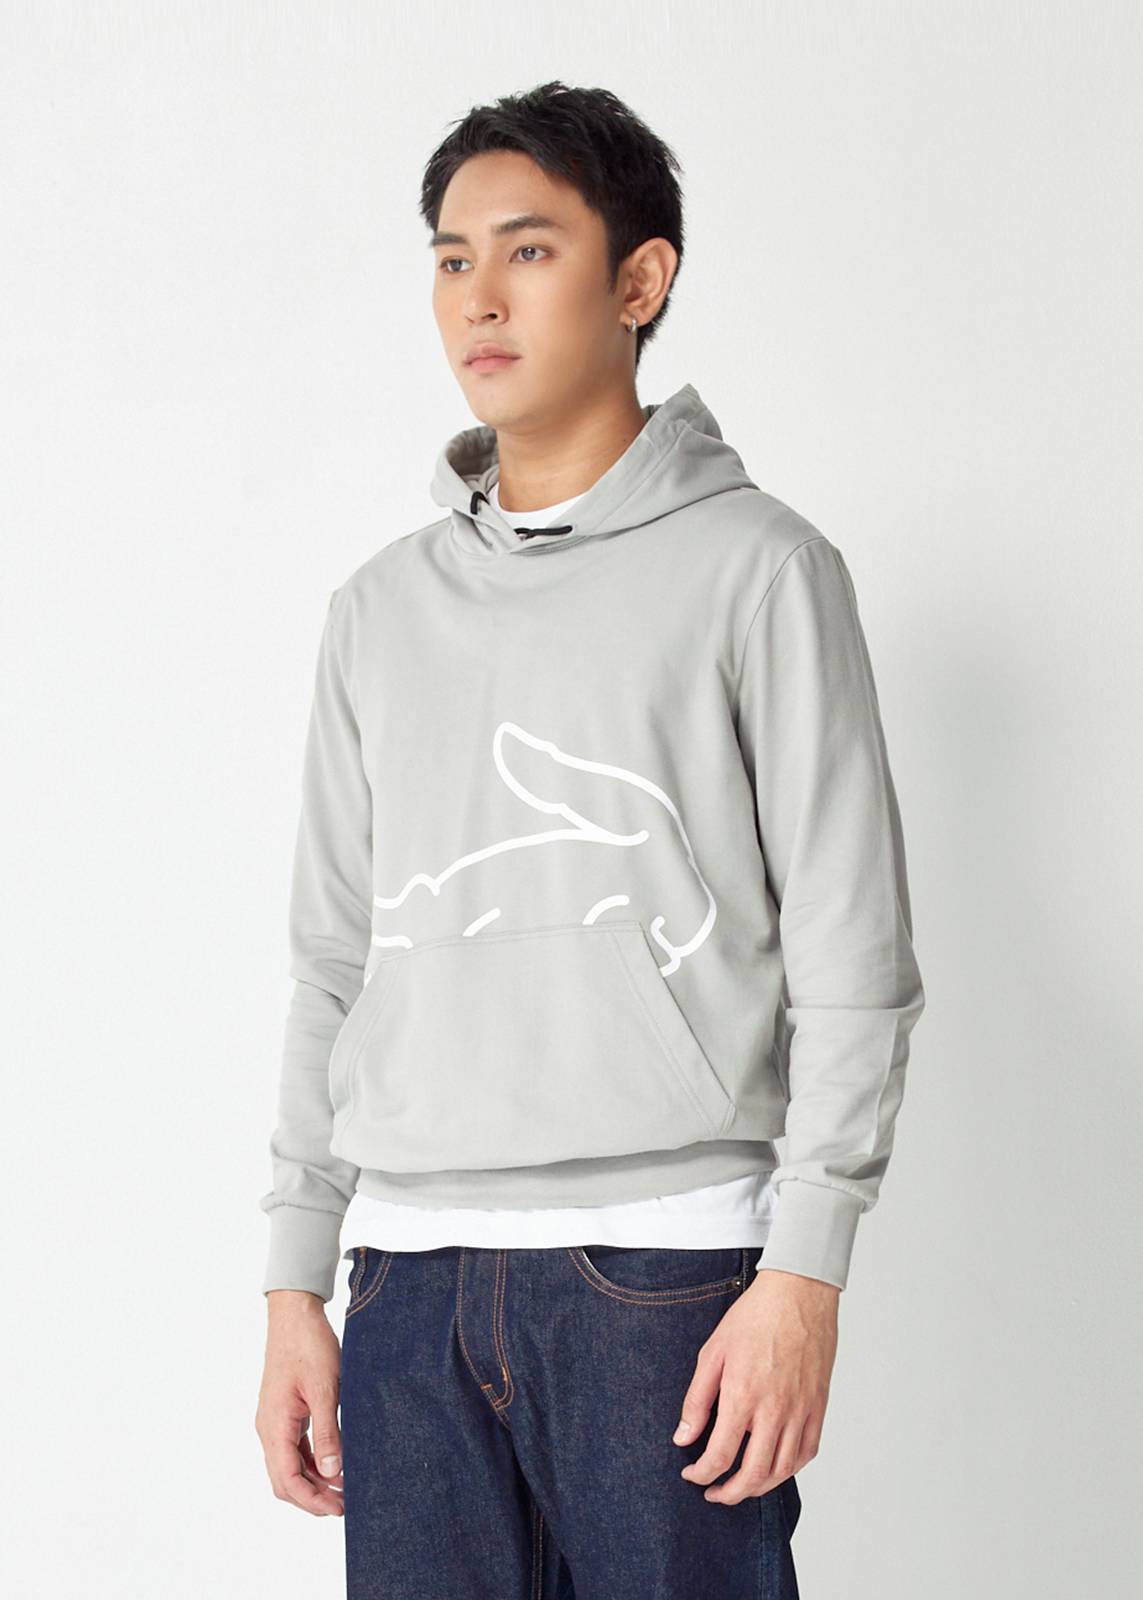 GRAY HOODIE CUSTOM FIT WITH GRAPHIC PRINT